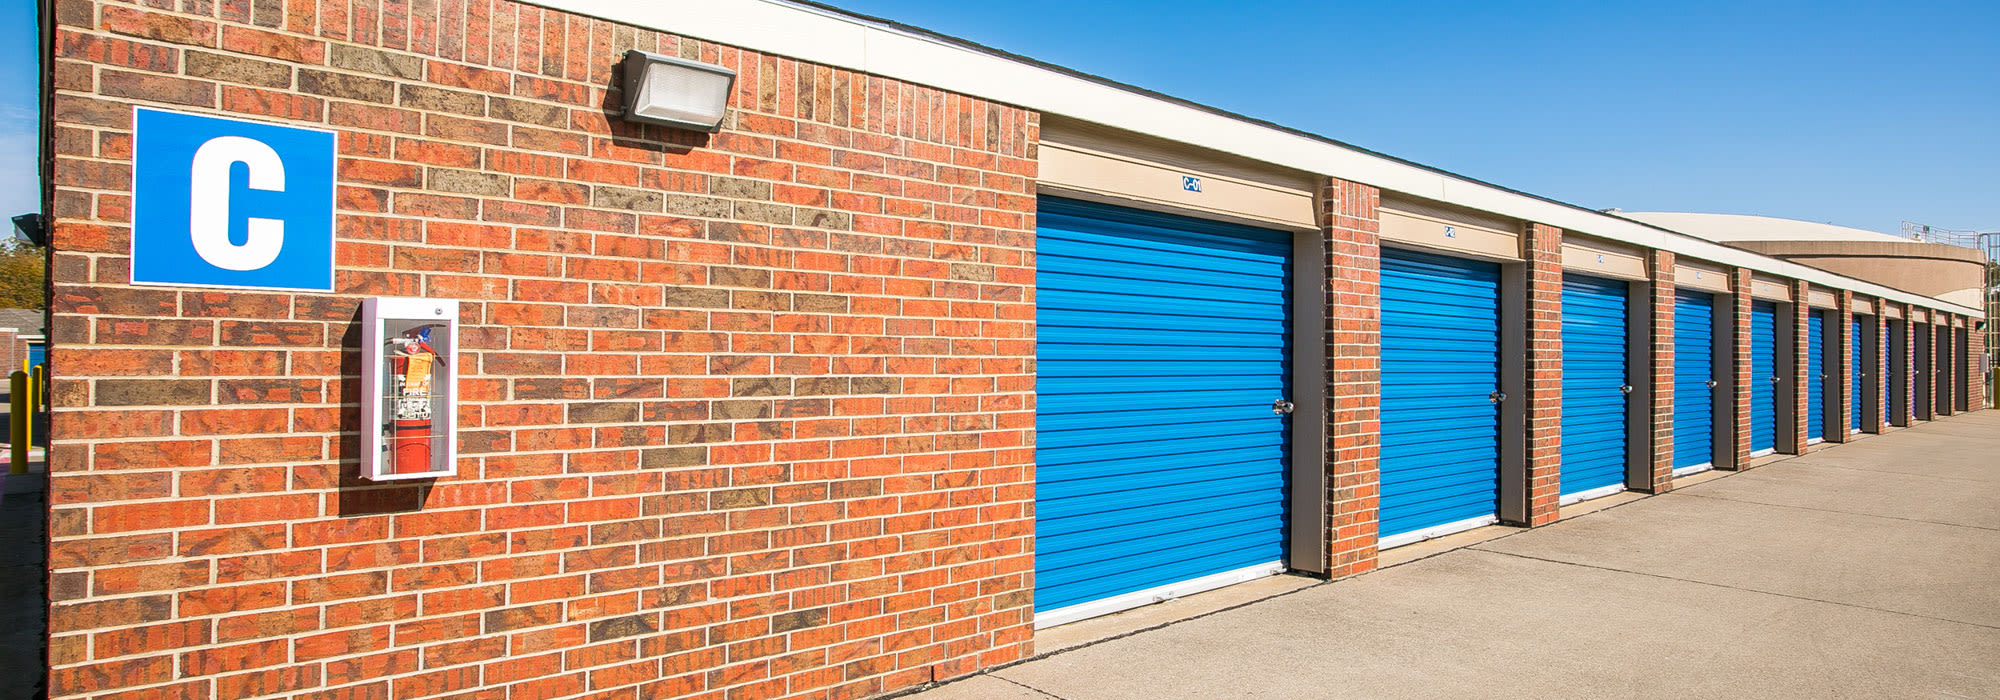 Security Self-Storage in Plano, Texas